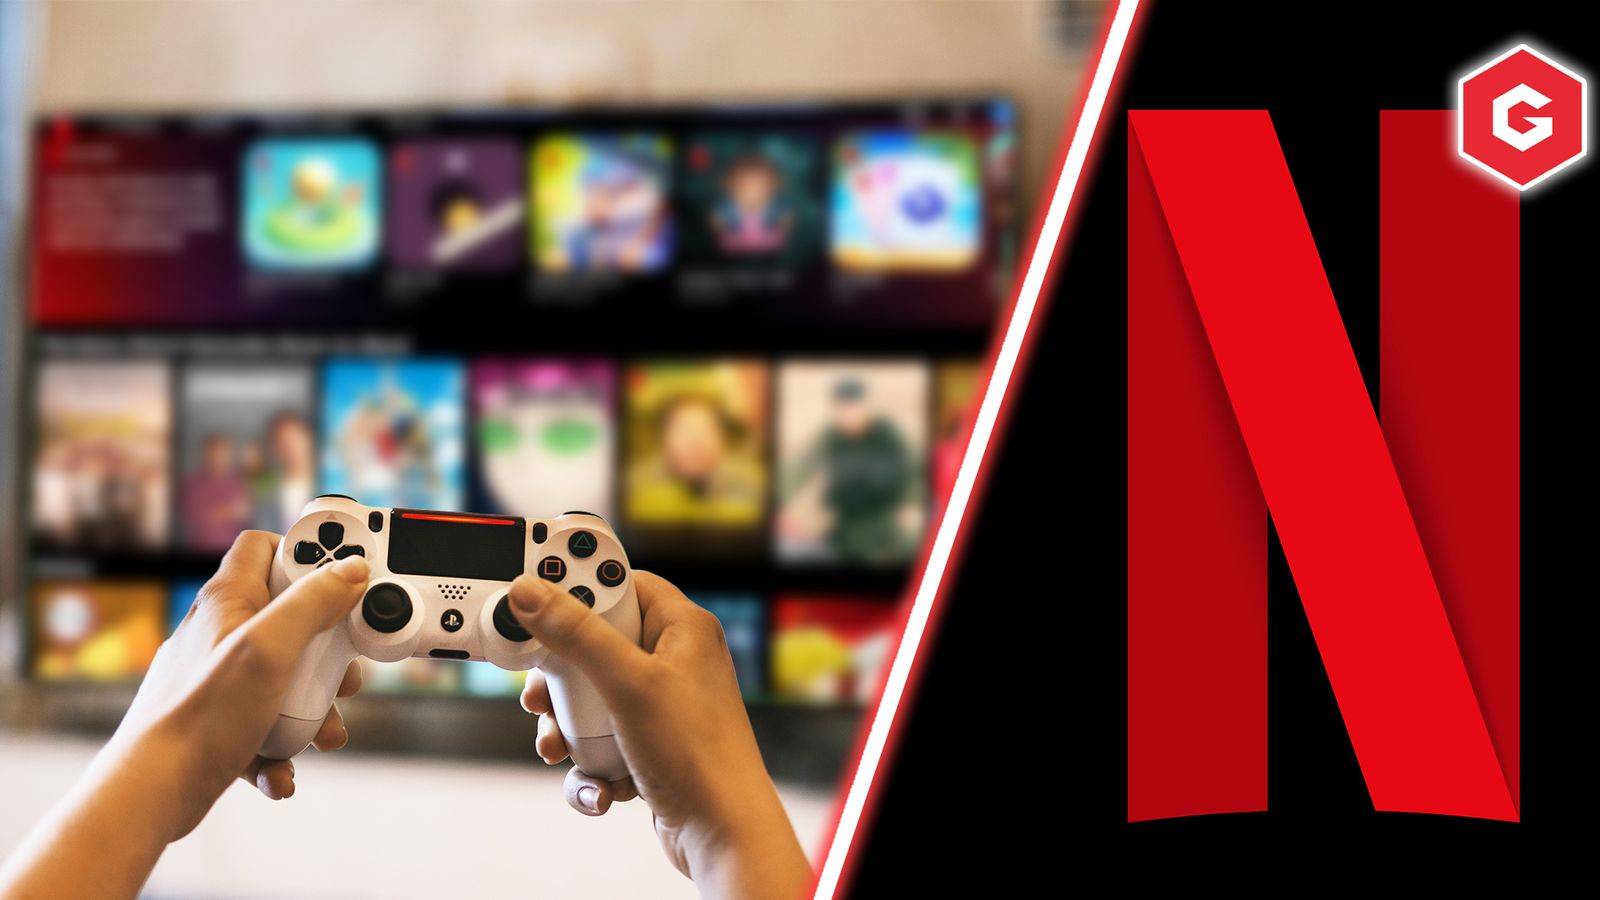 An image of games controller being used for Netflix.